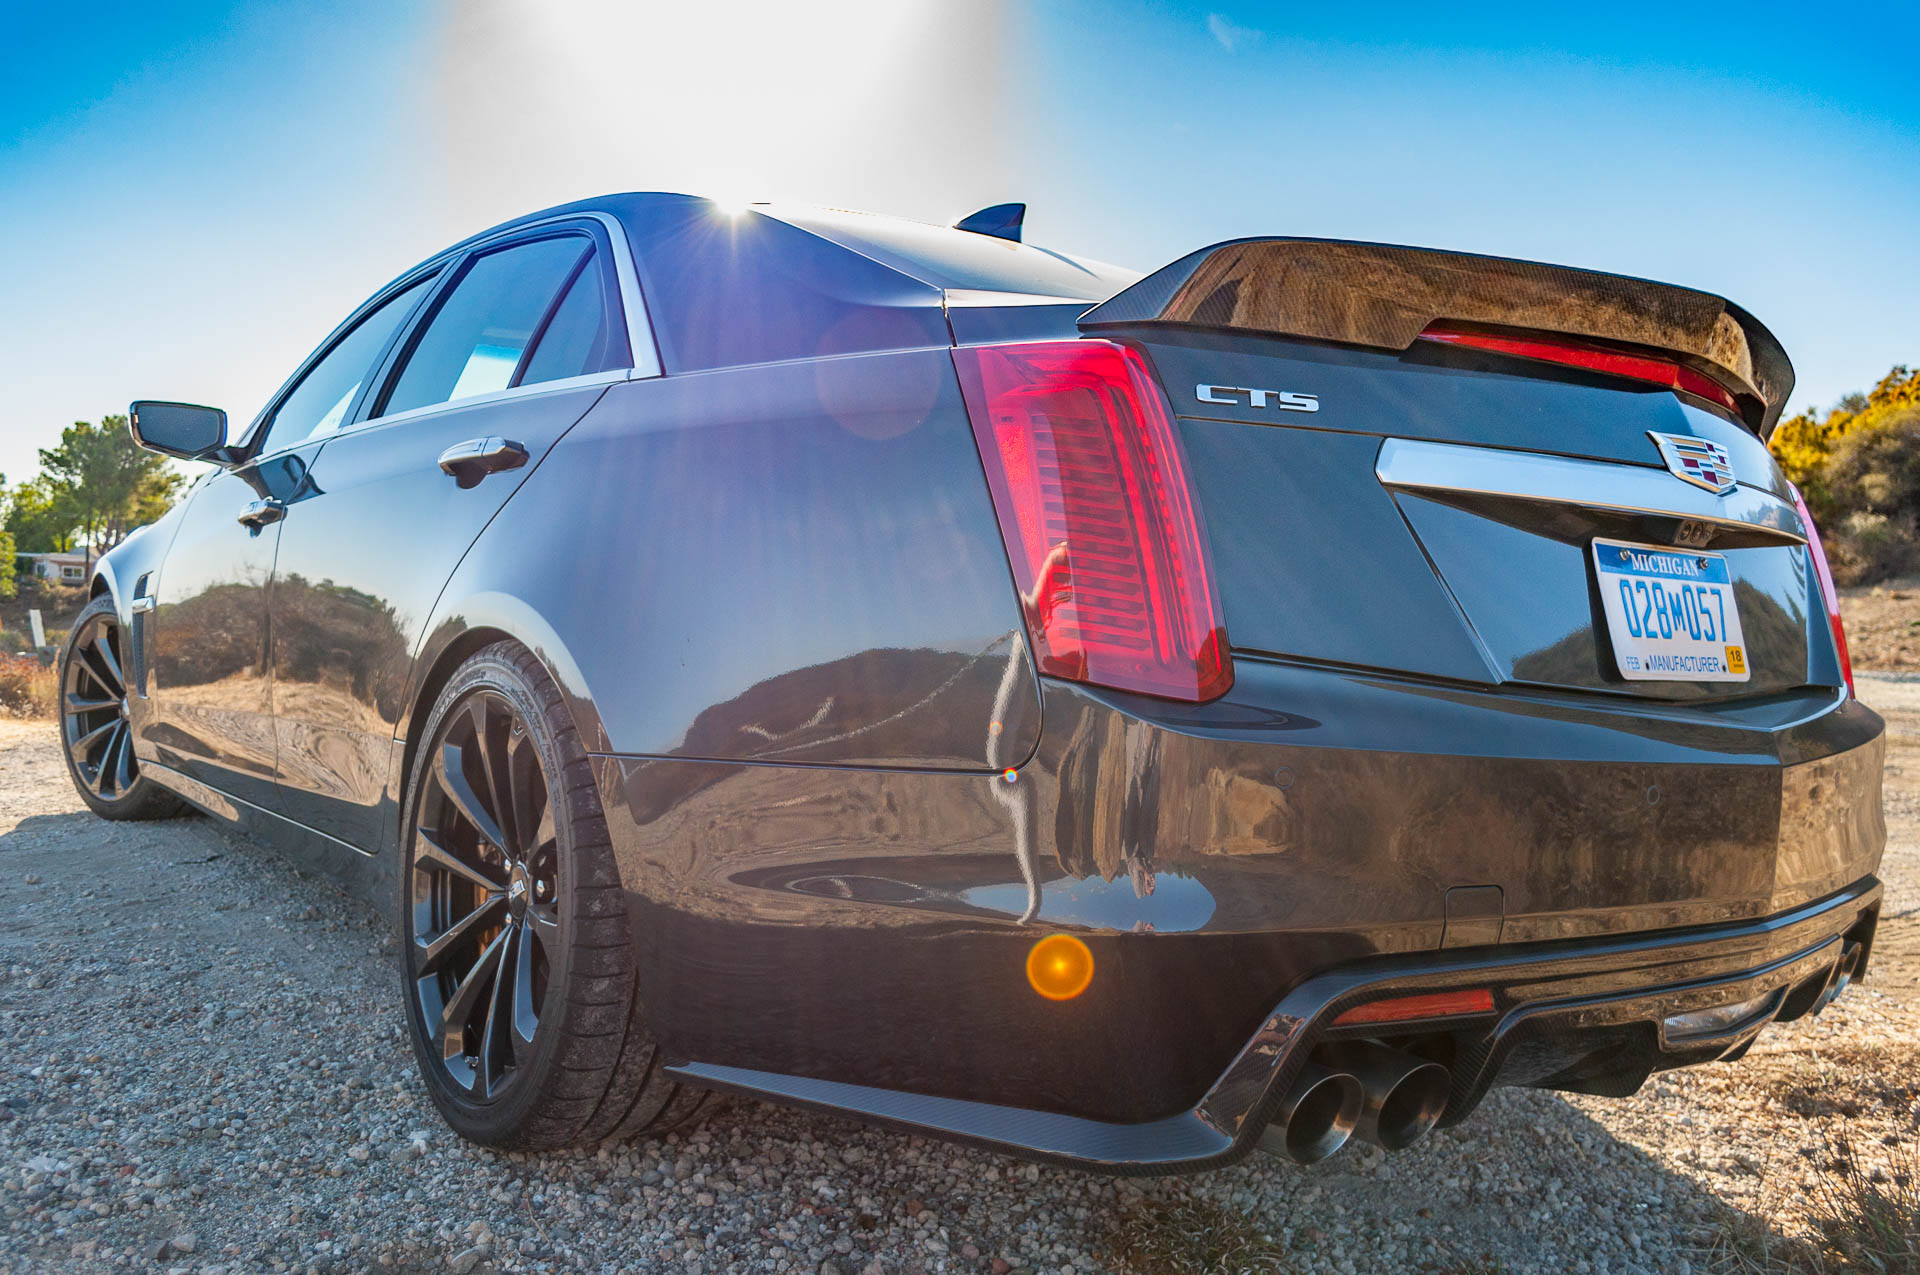 8 things you need to know about the 2018 Cadillac CTS-V